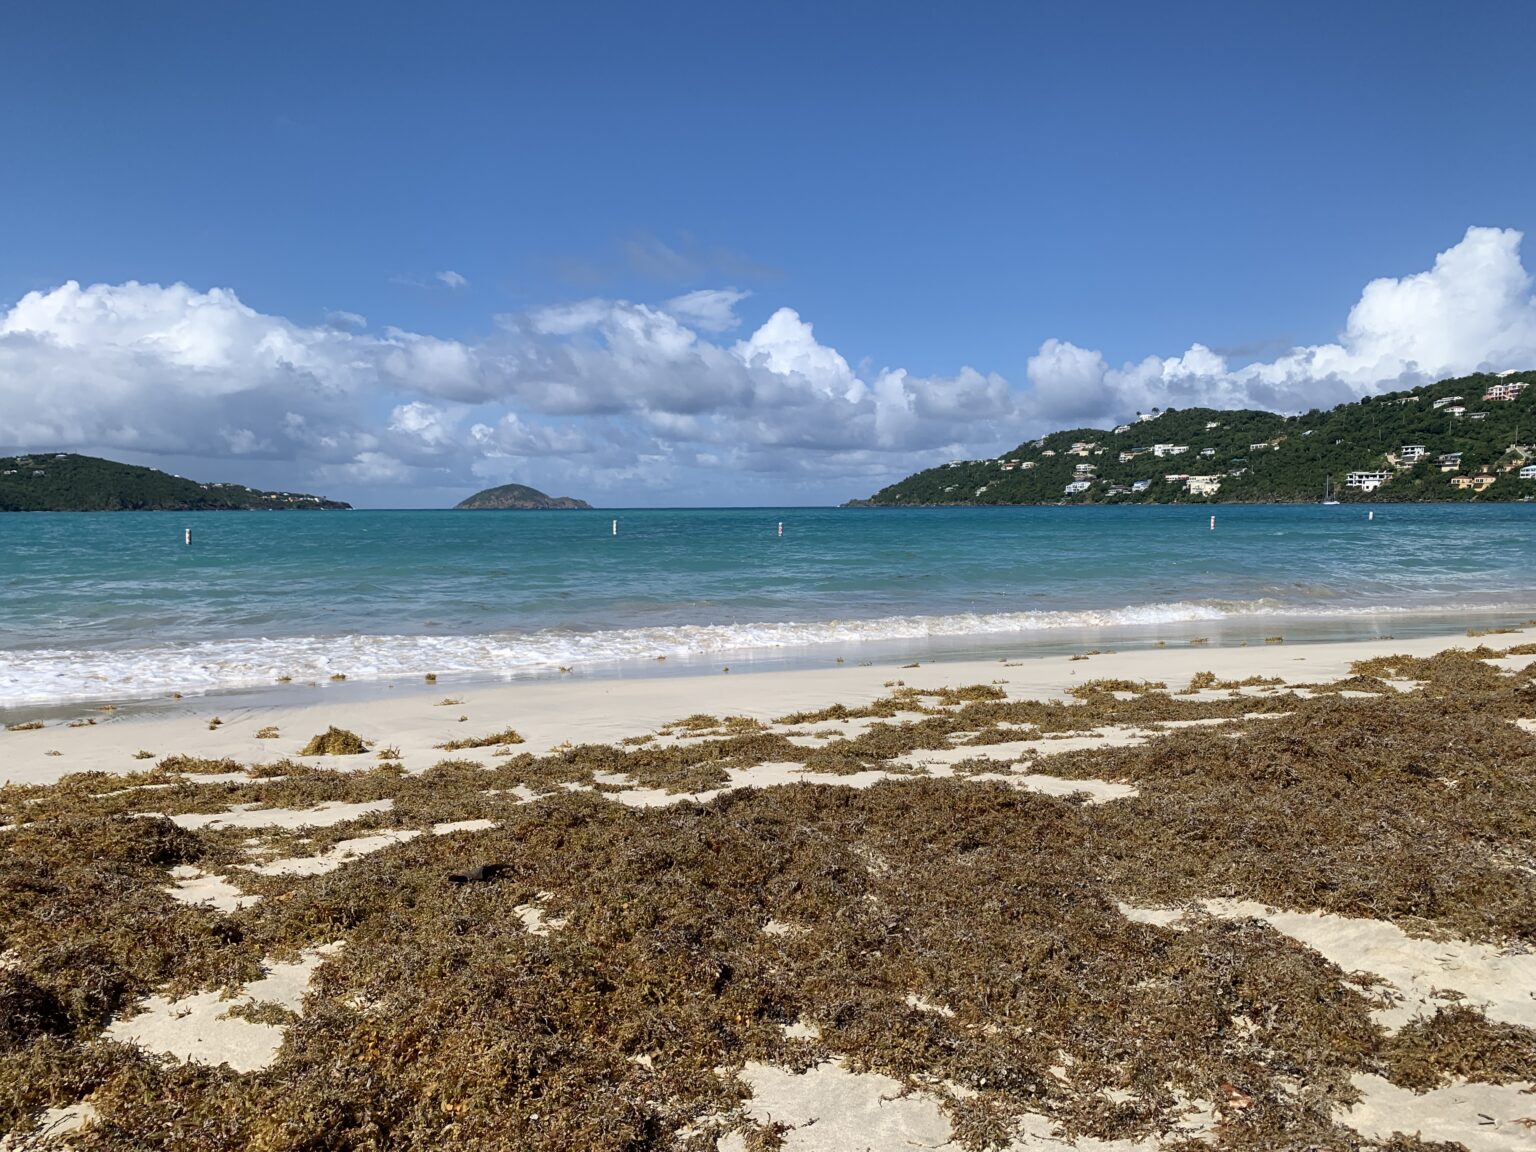 An Inundation of Sargassum Seaweed is Moving Westward USVI in the Path